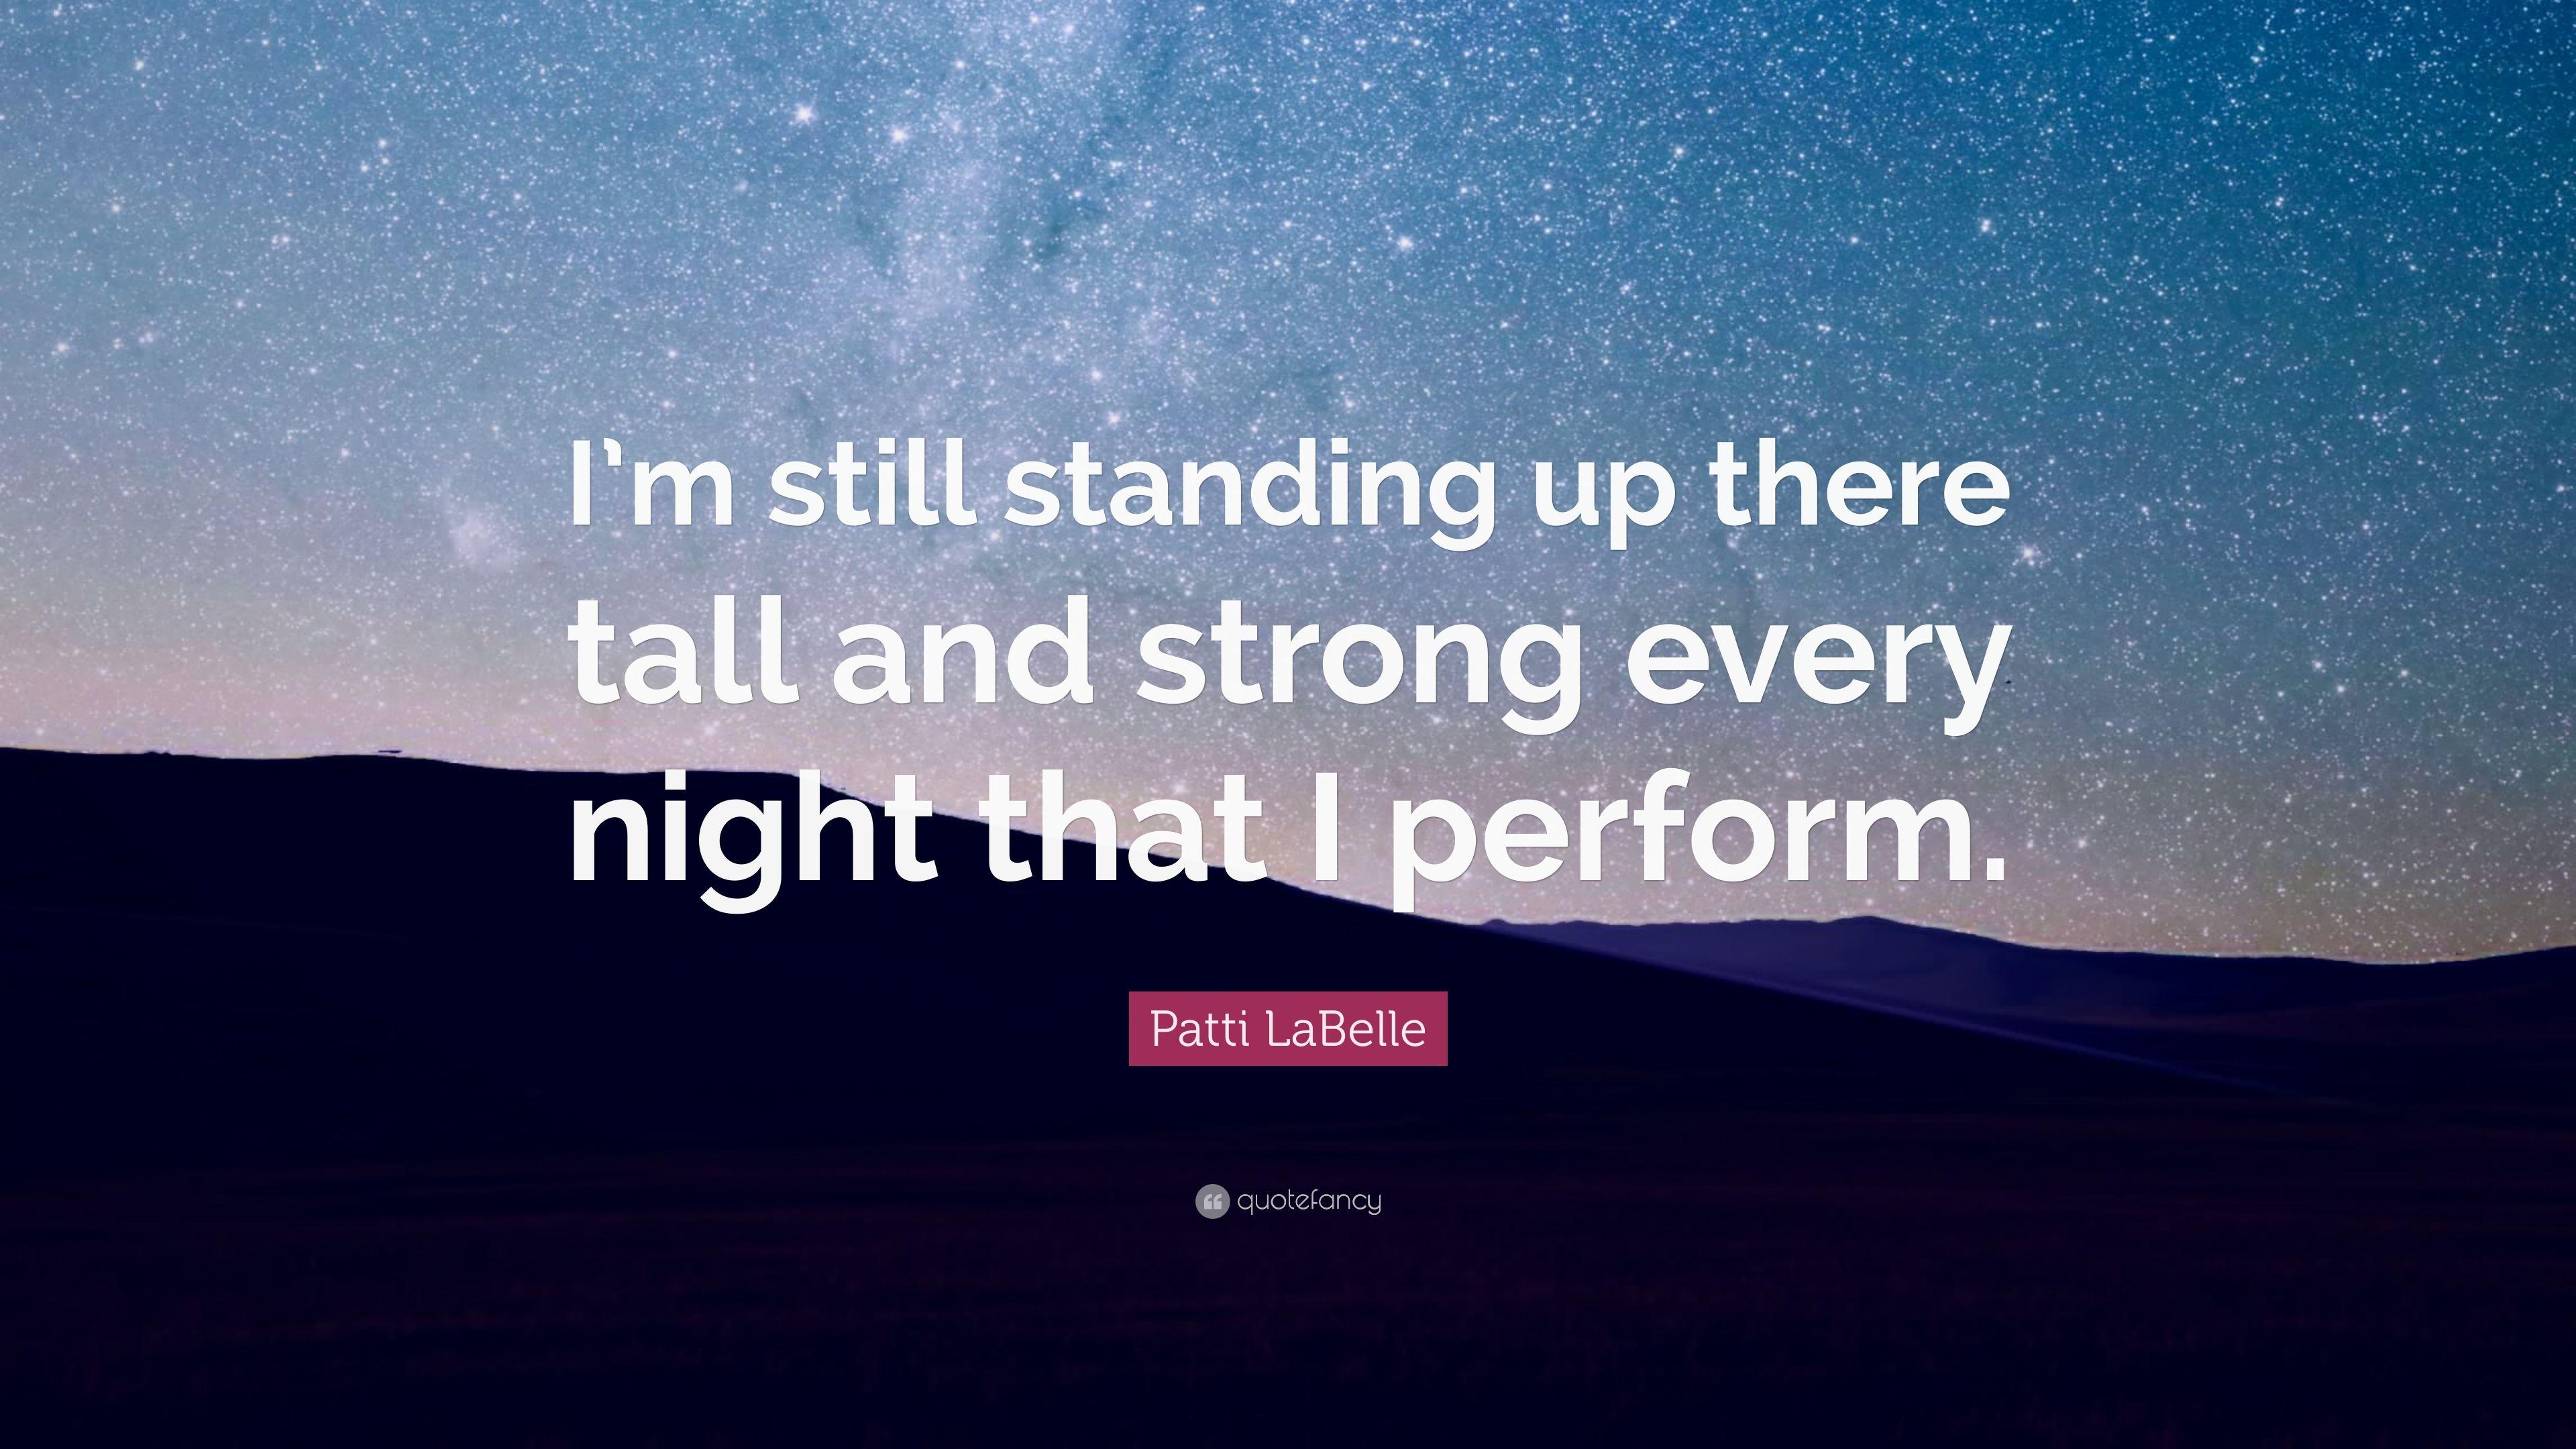 Patti LaBelle Quote: “I'm still standing up there tall and strong